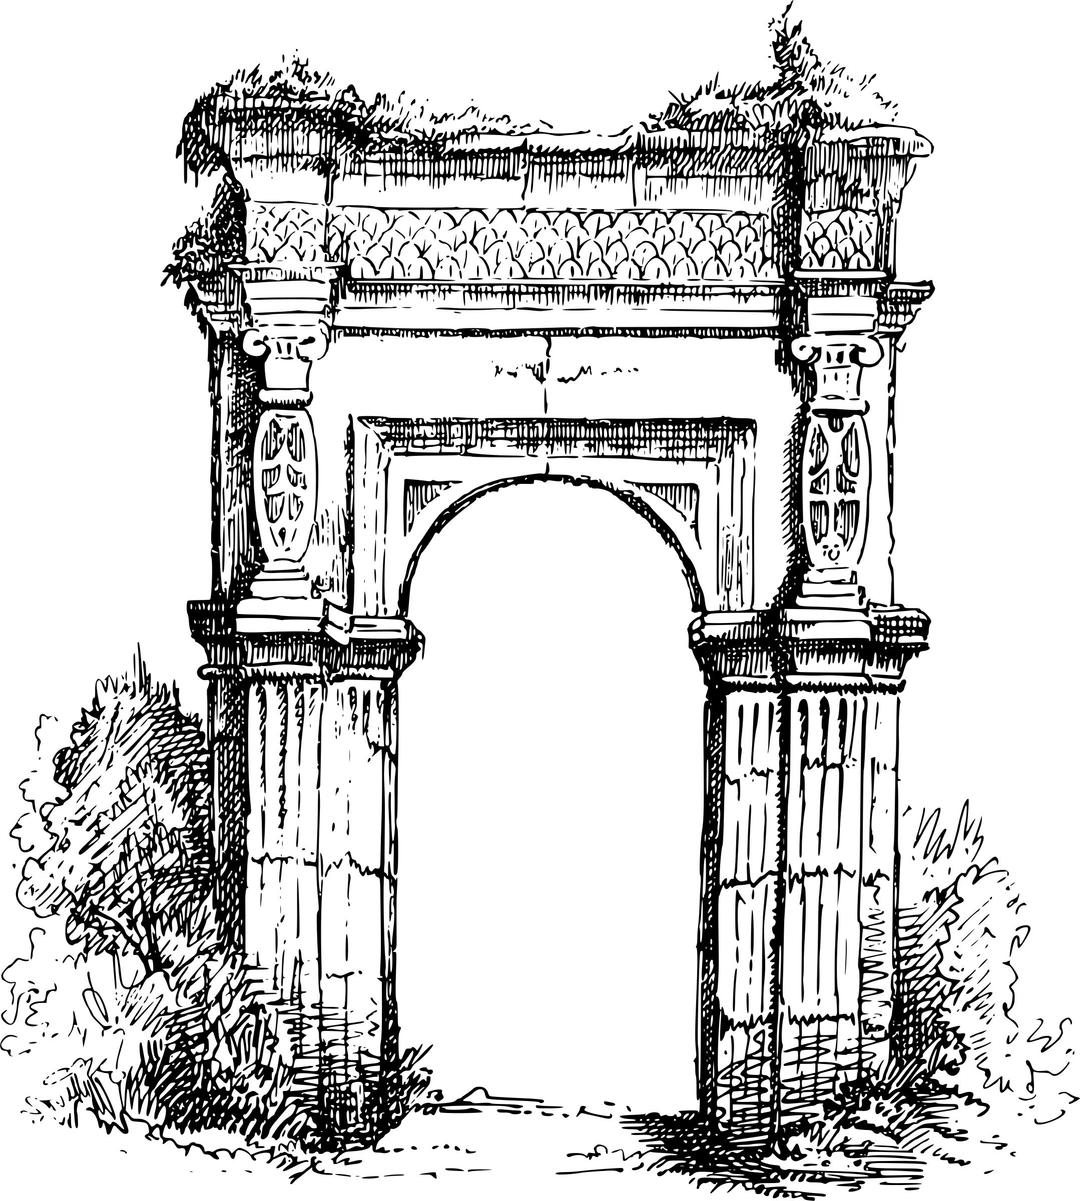 Archway png transparent